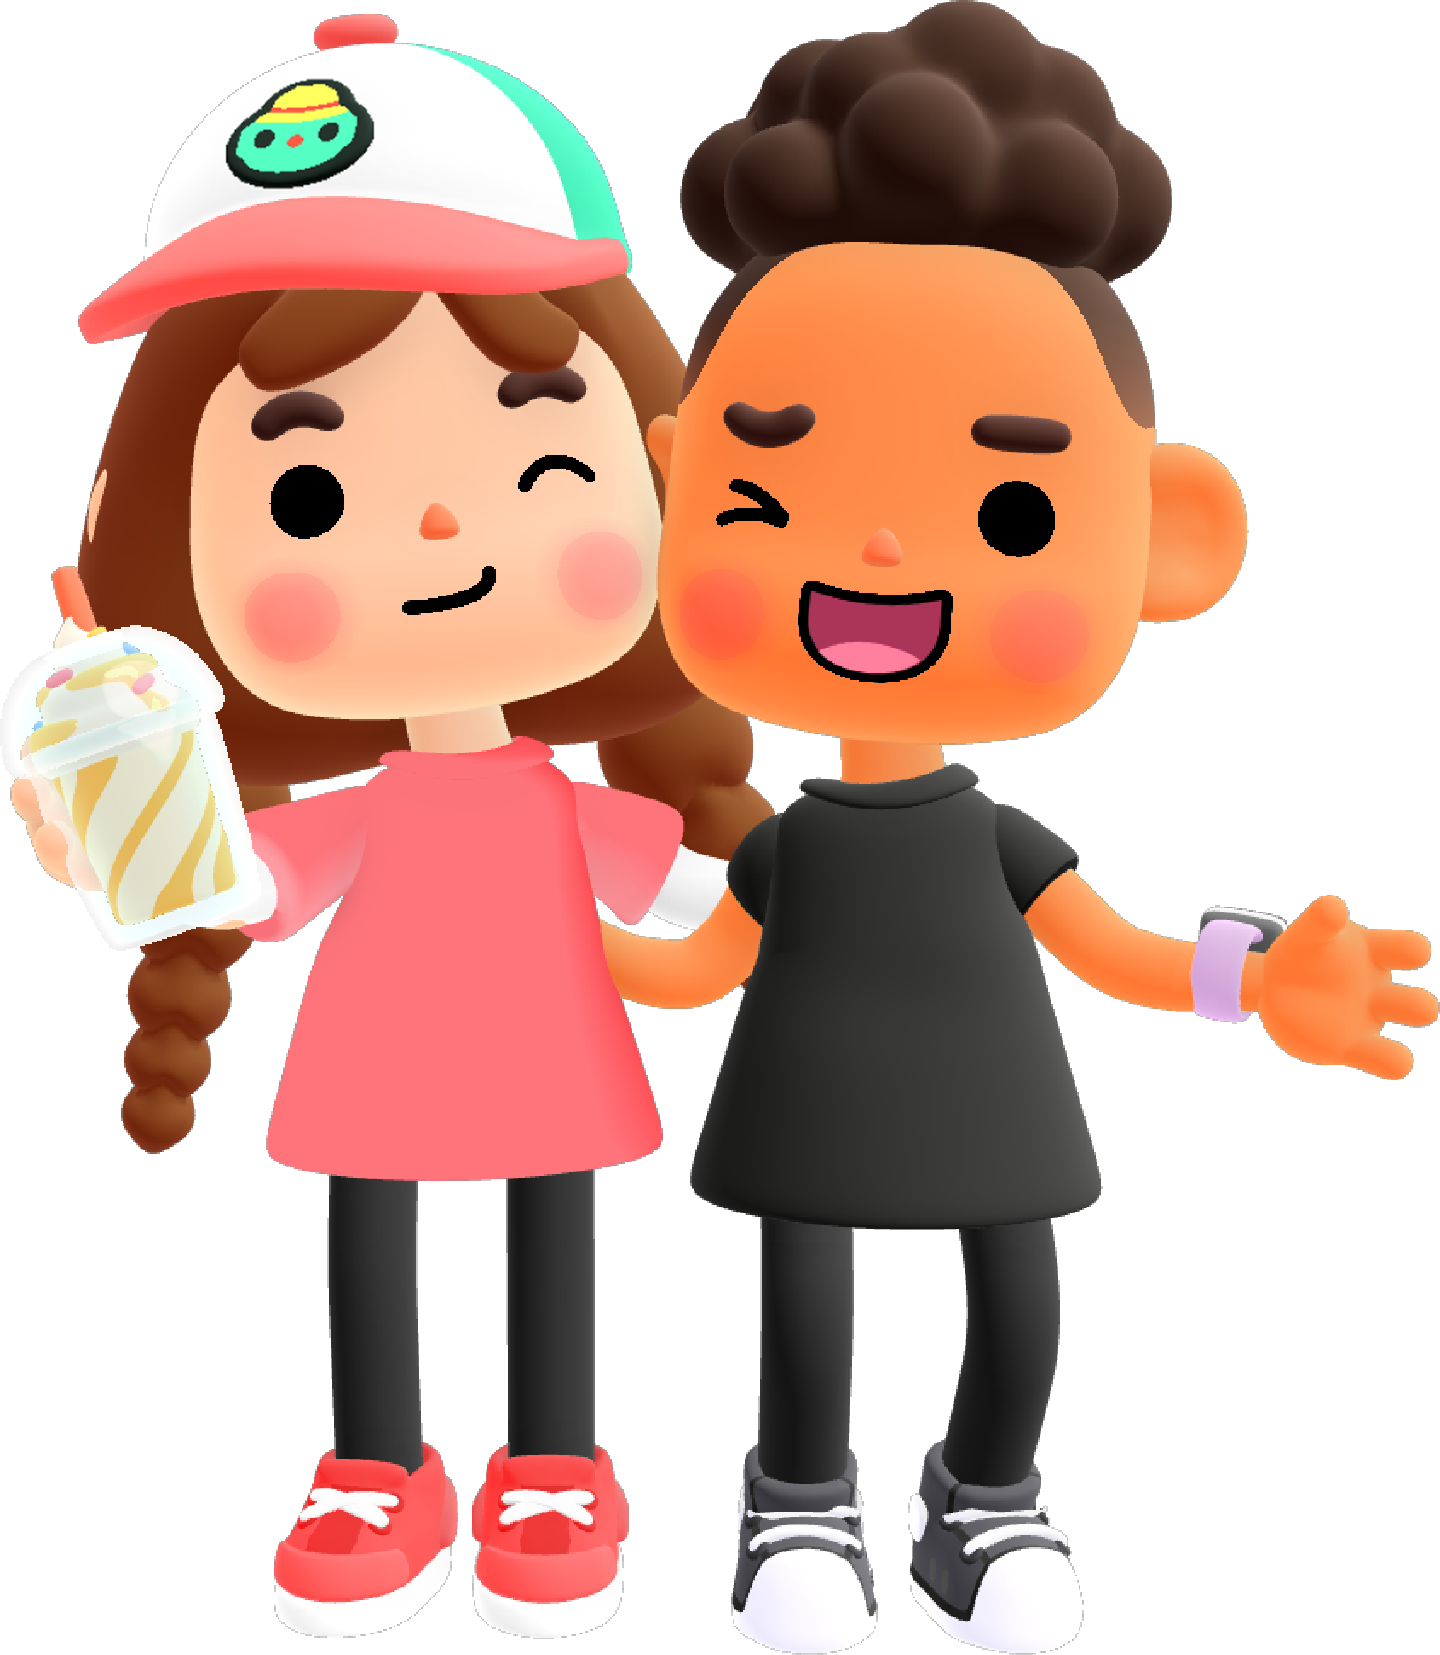 This is an image of two of the characters or avatars from Toca Boca Days. The character to the right has longer hair and is casually dressed in a red shirt and cool red and green cap with a red peak. They are holding what looks like a thickshake. The character to the right has a darker skin tone and is wearing an all black outfit with a purple watch. They have one arm around each other and are laughing and smiling. Both are winking at you but in their own style.